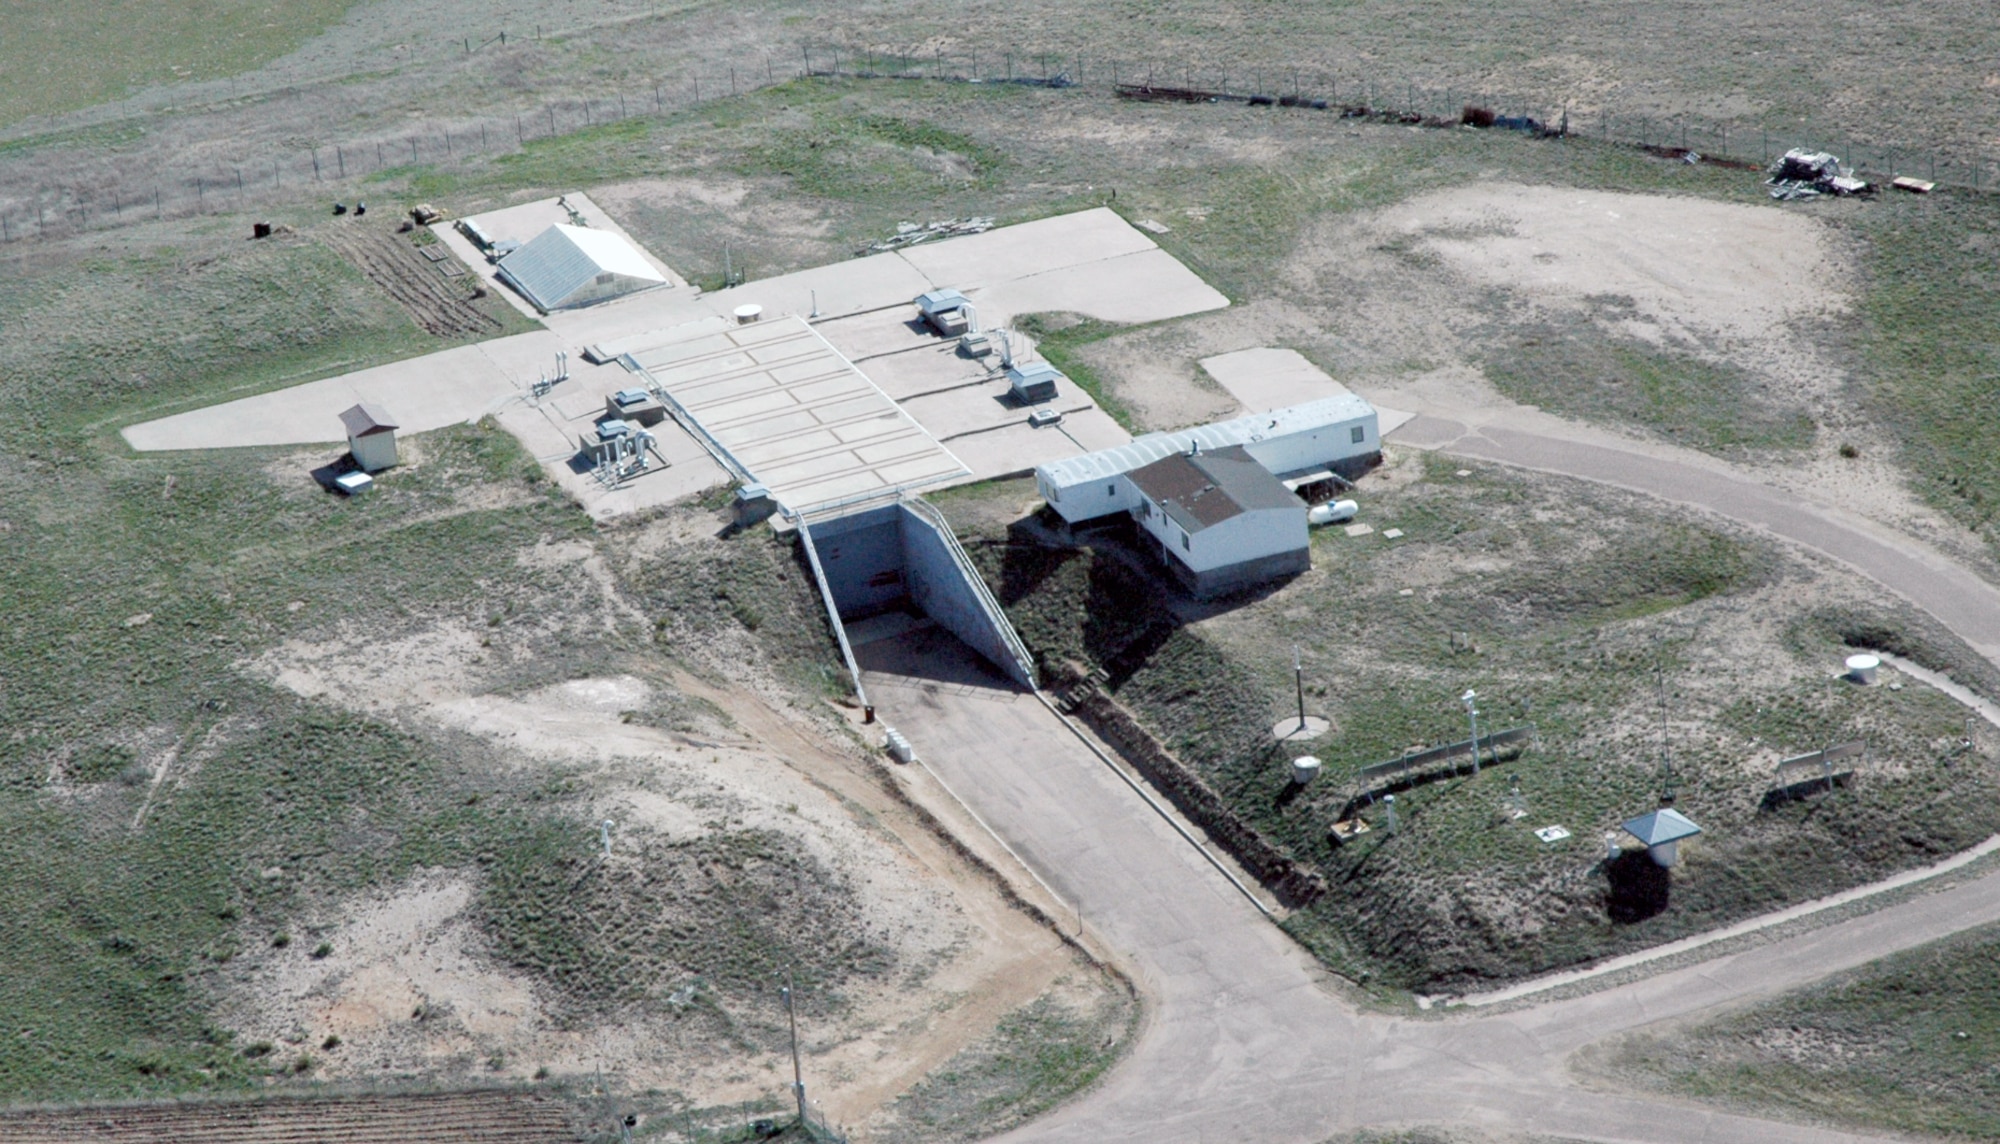 An Atlas E missile site is now home for a couple who bought the property located just outside Kimball, Neb. The large, metal doors that once contained a powerful nuclear missile now contain an RV.